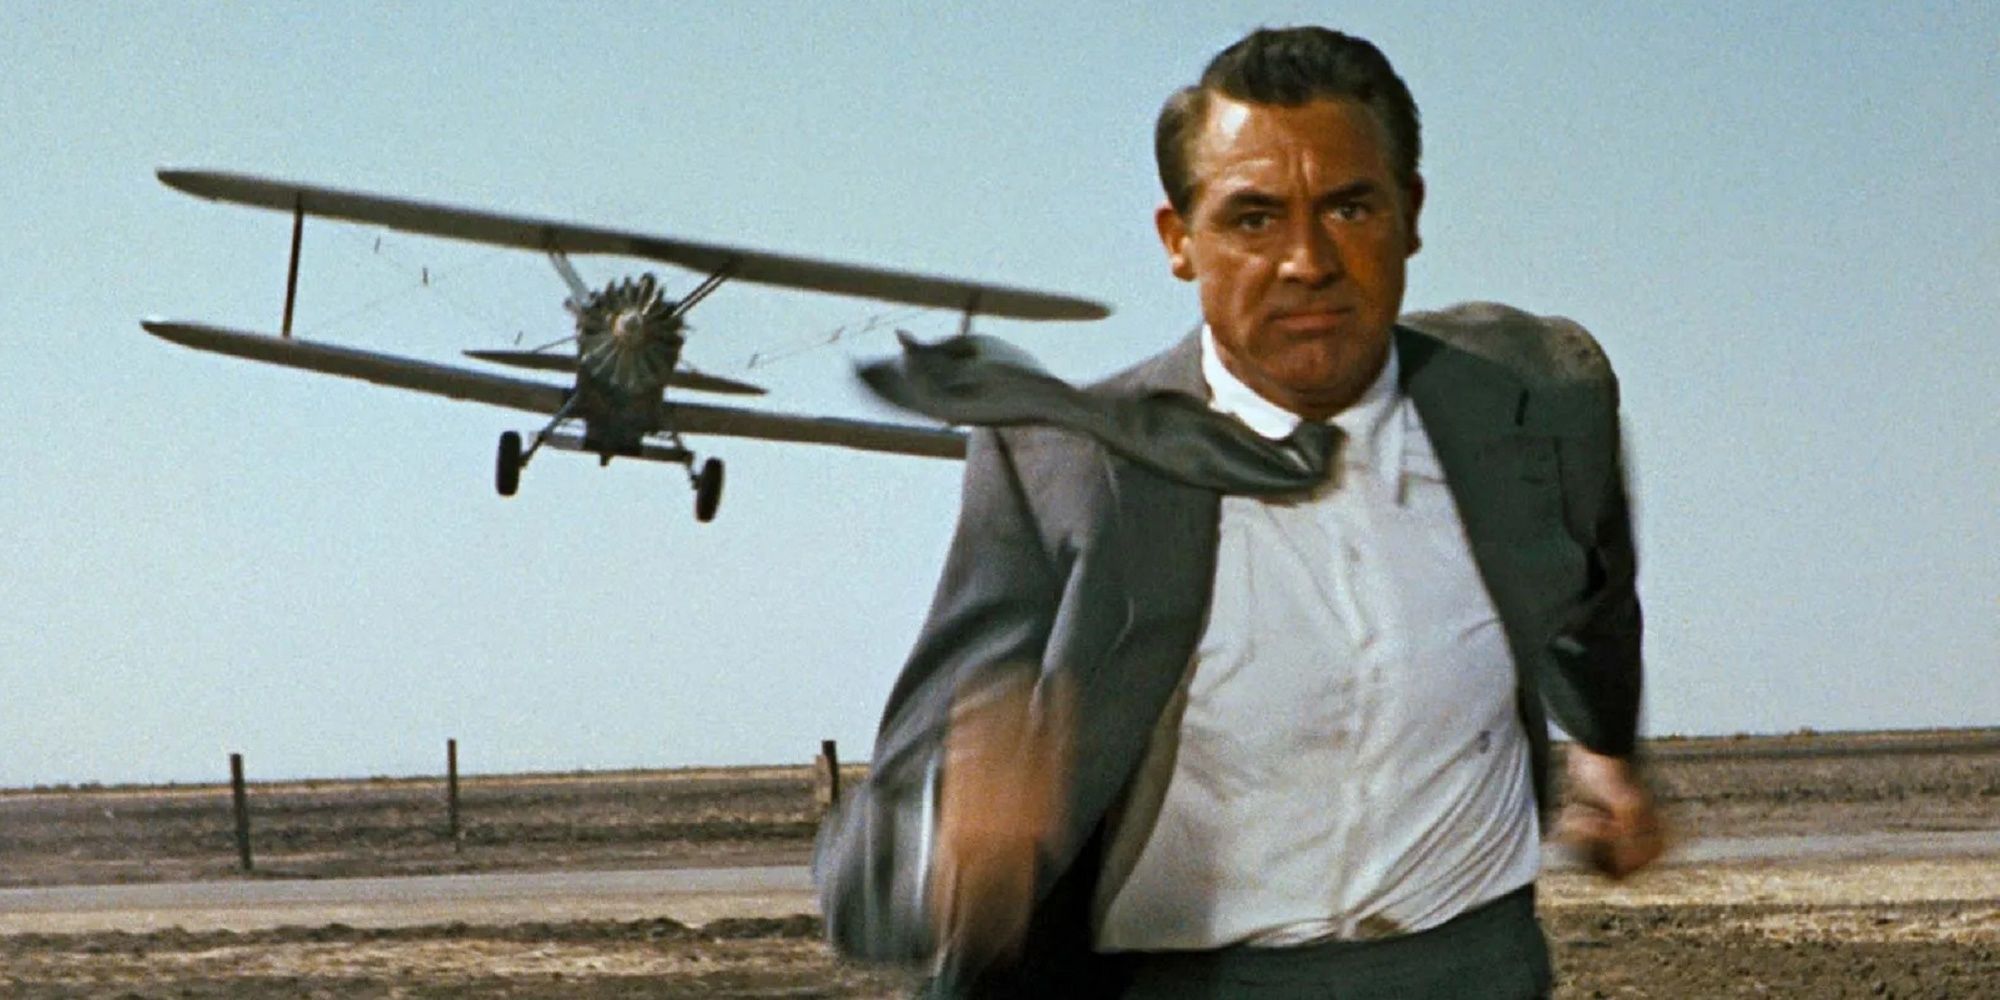 North by Northwest - Cary Grant